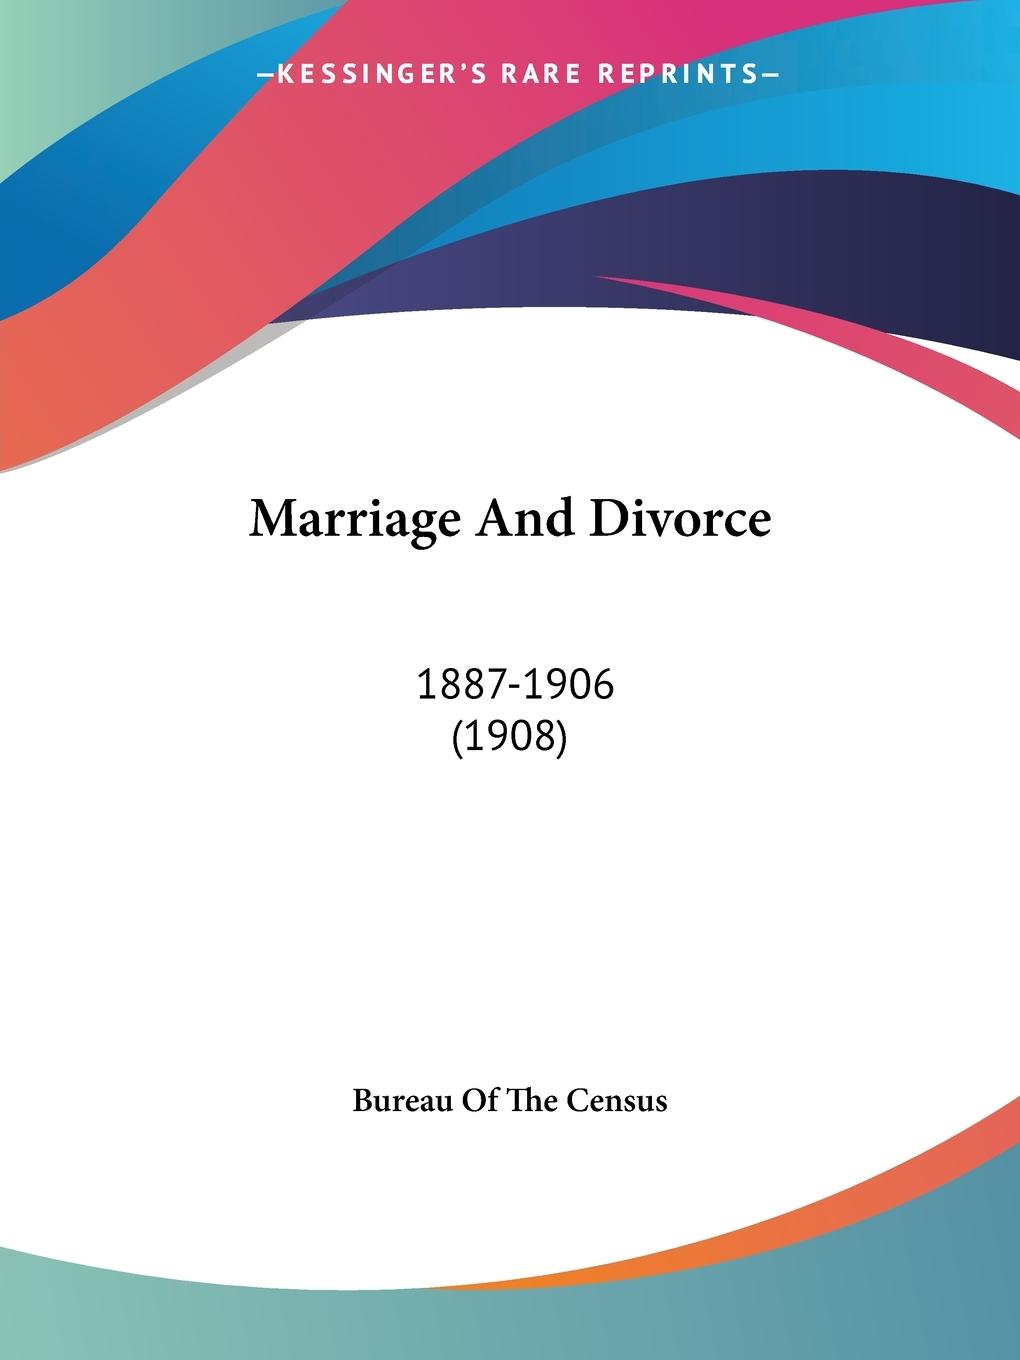 Marriage And Divorce - Bureau Of The Census